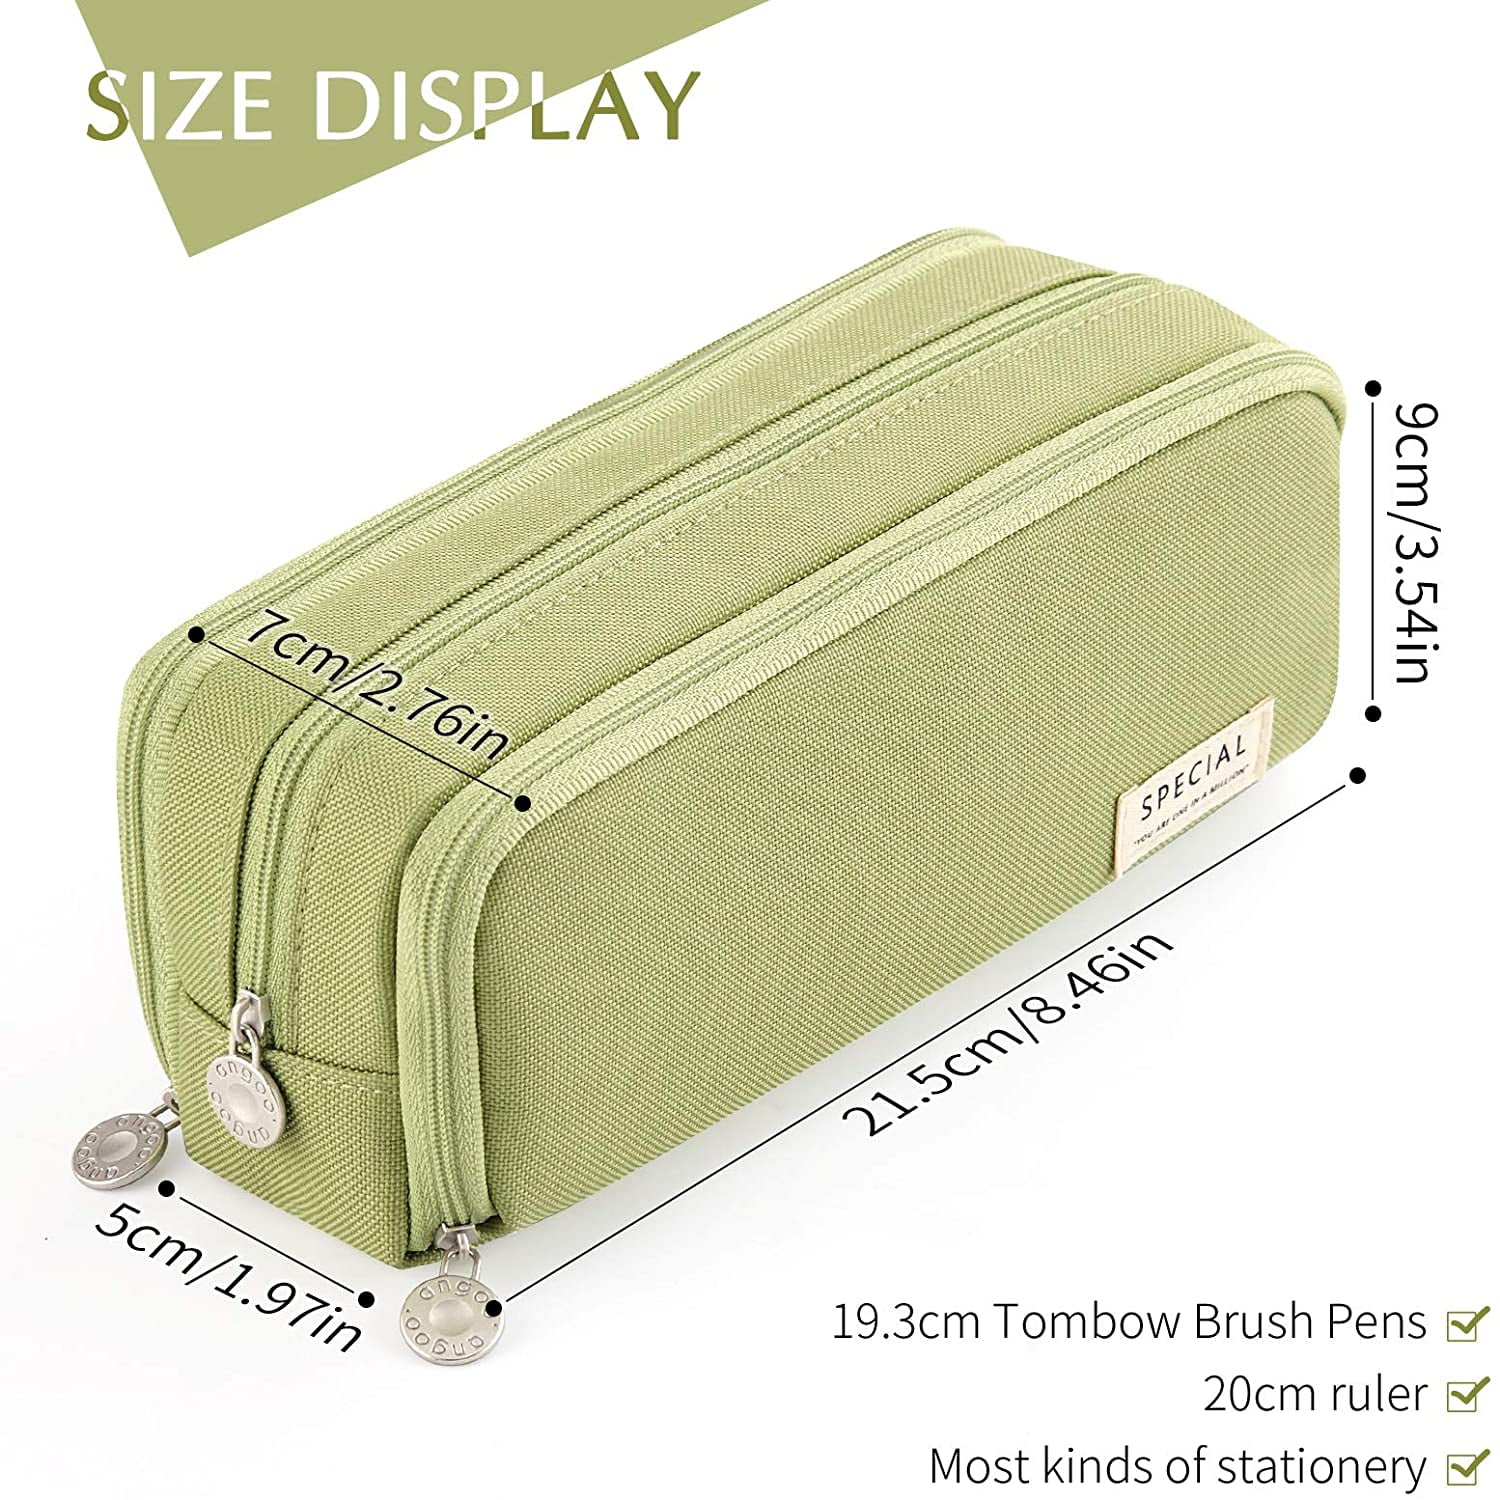 Shengxiny Canvas Pencil Pouch for School Supplies Multi-Purpose Travel Bags Pen Pencil Case Clearance Small Zipper Pouch, Size: One size, Green